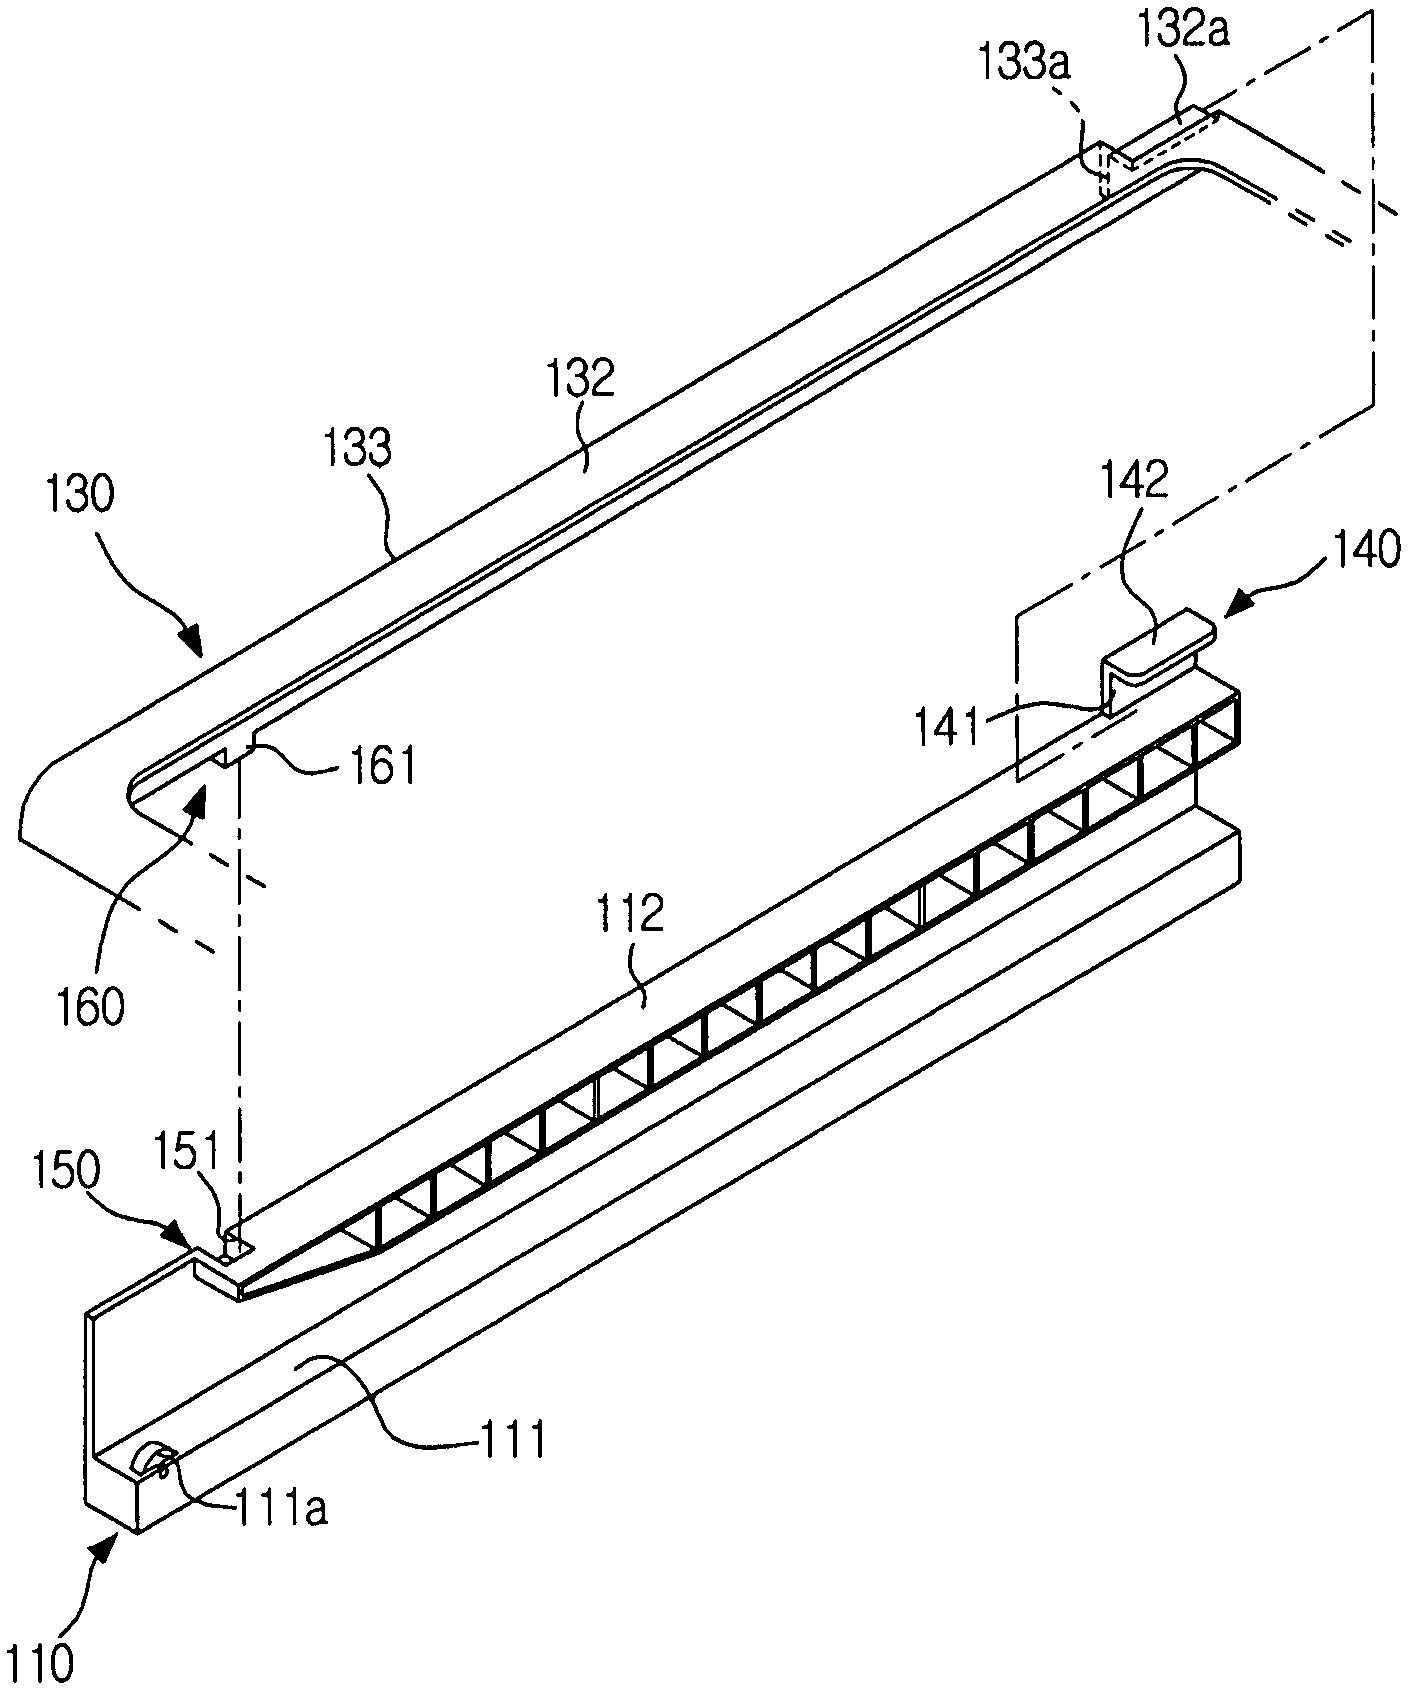 Drawer type receiving device of a refrigerator